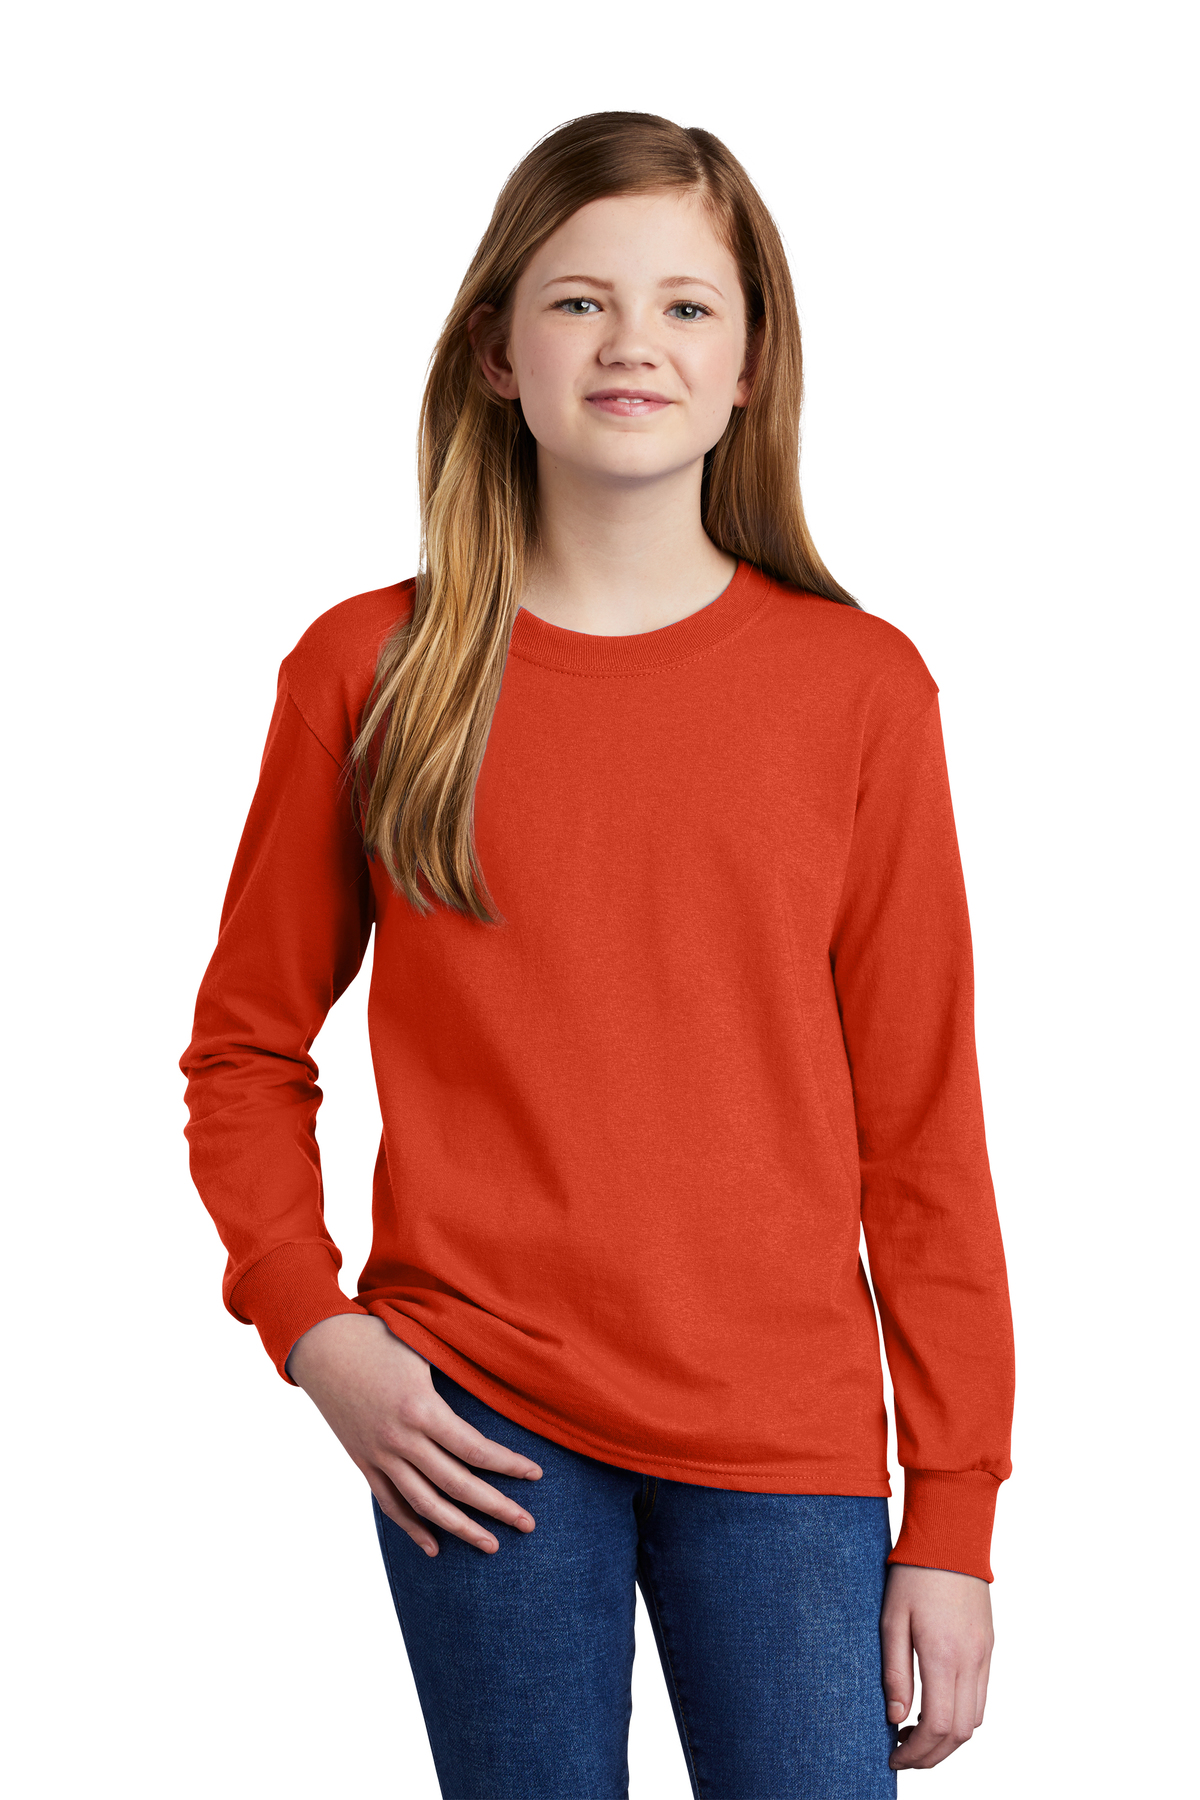 Port & Company Youth Long Sleeve Core Cotton Tee | Product | Port